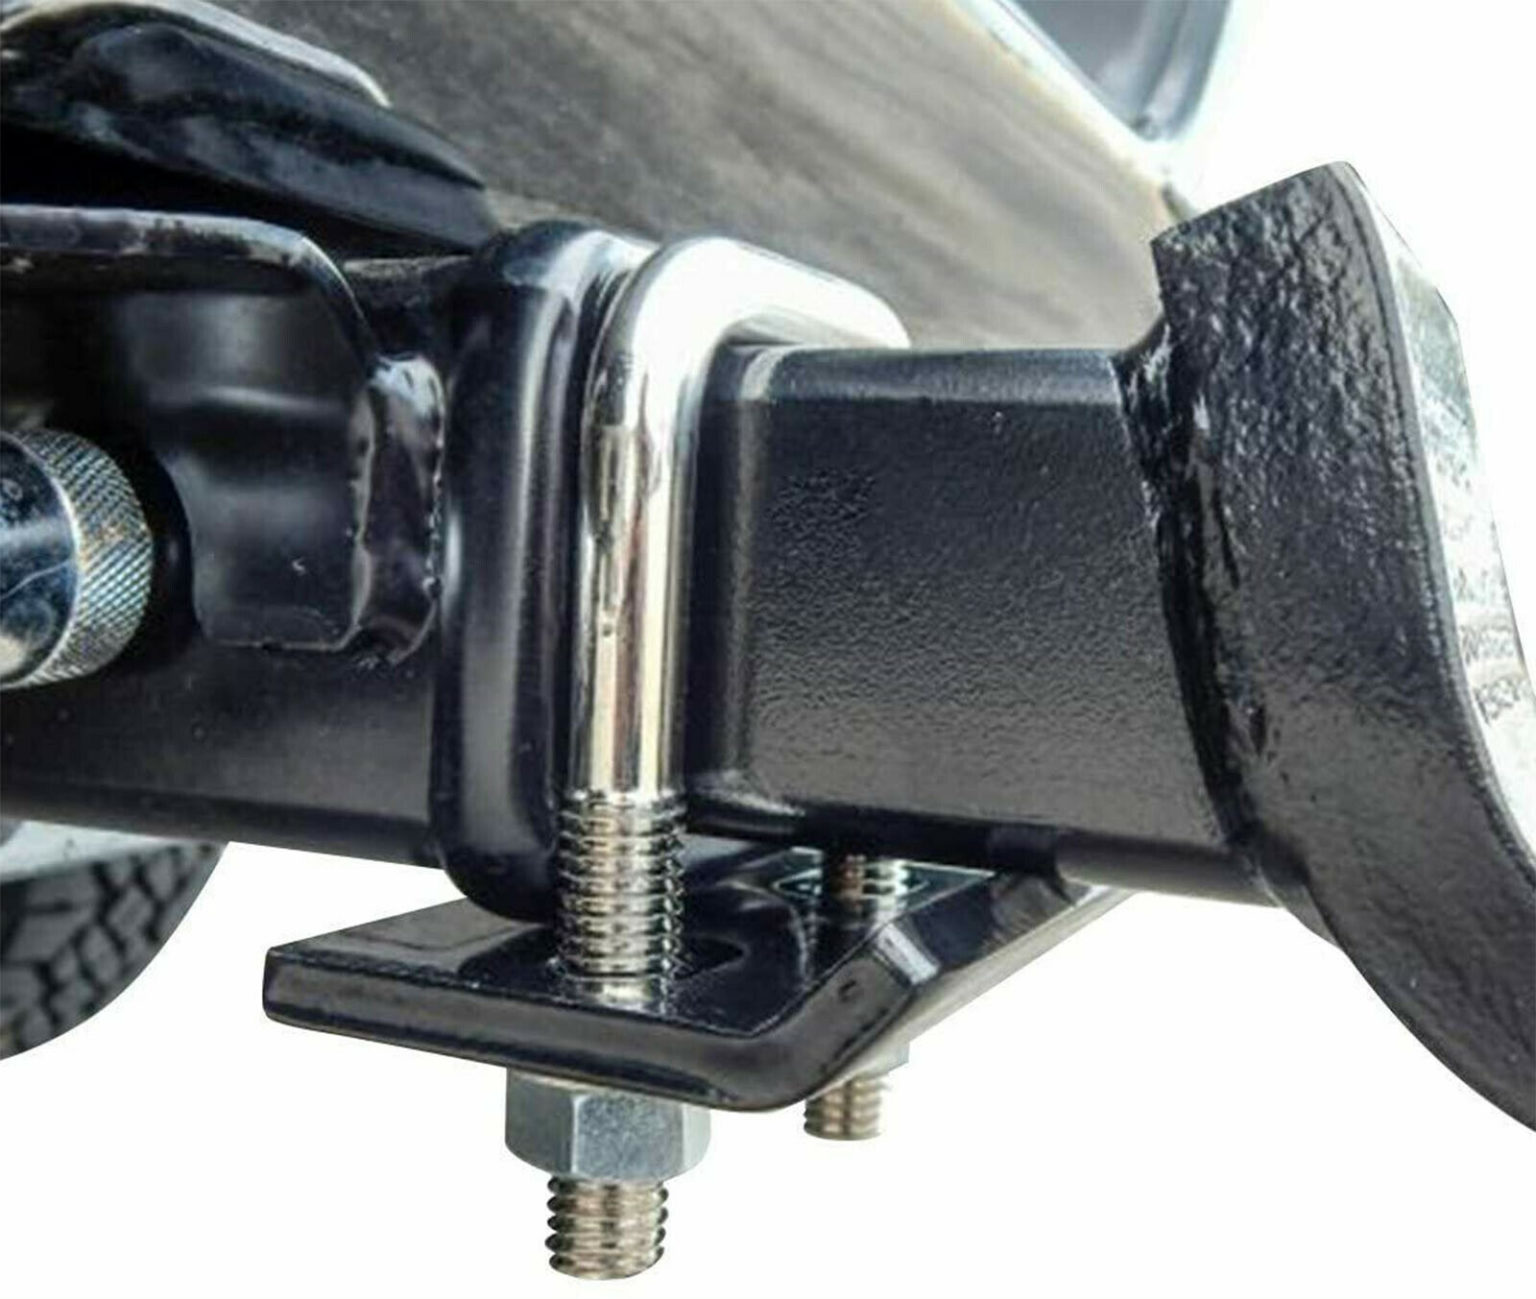 hitch-tightener-stabilizer-anti-rattle-towing-tow-clamp-2-trailer-lock-down-econosuperstore